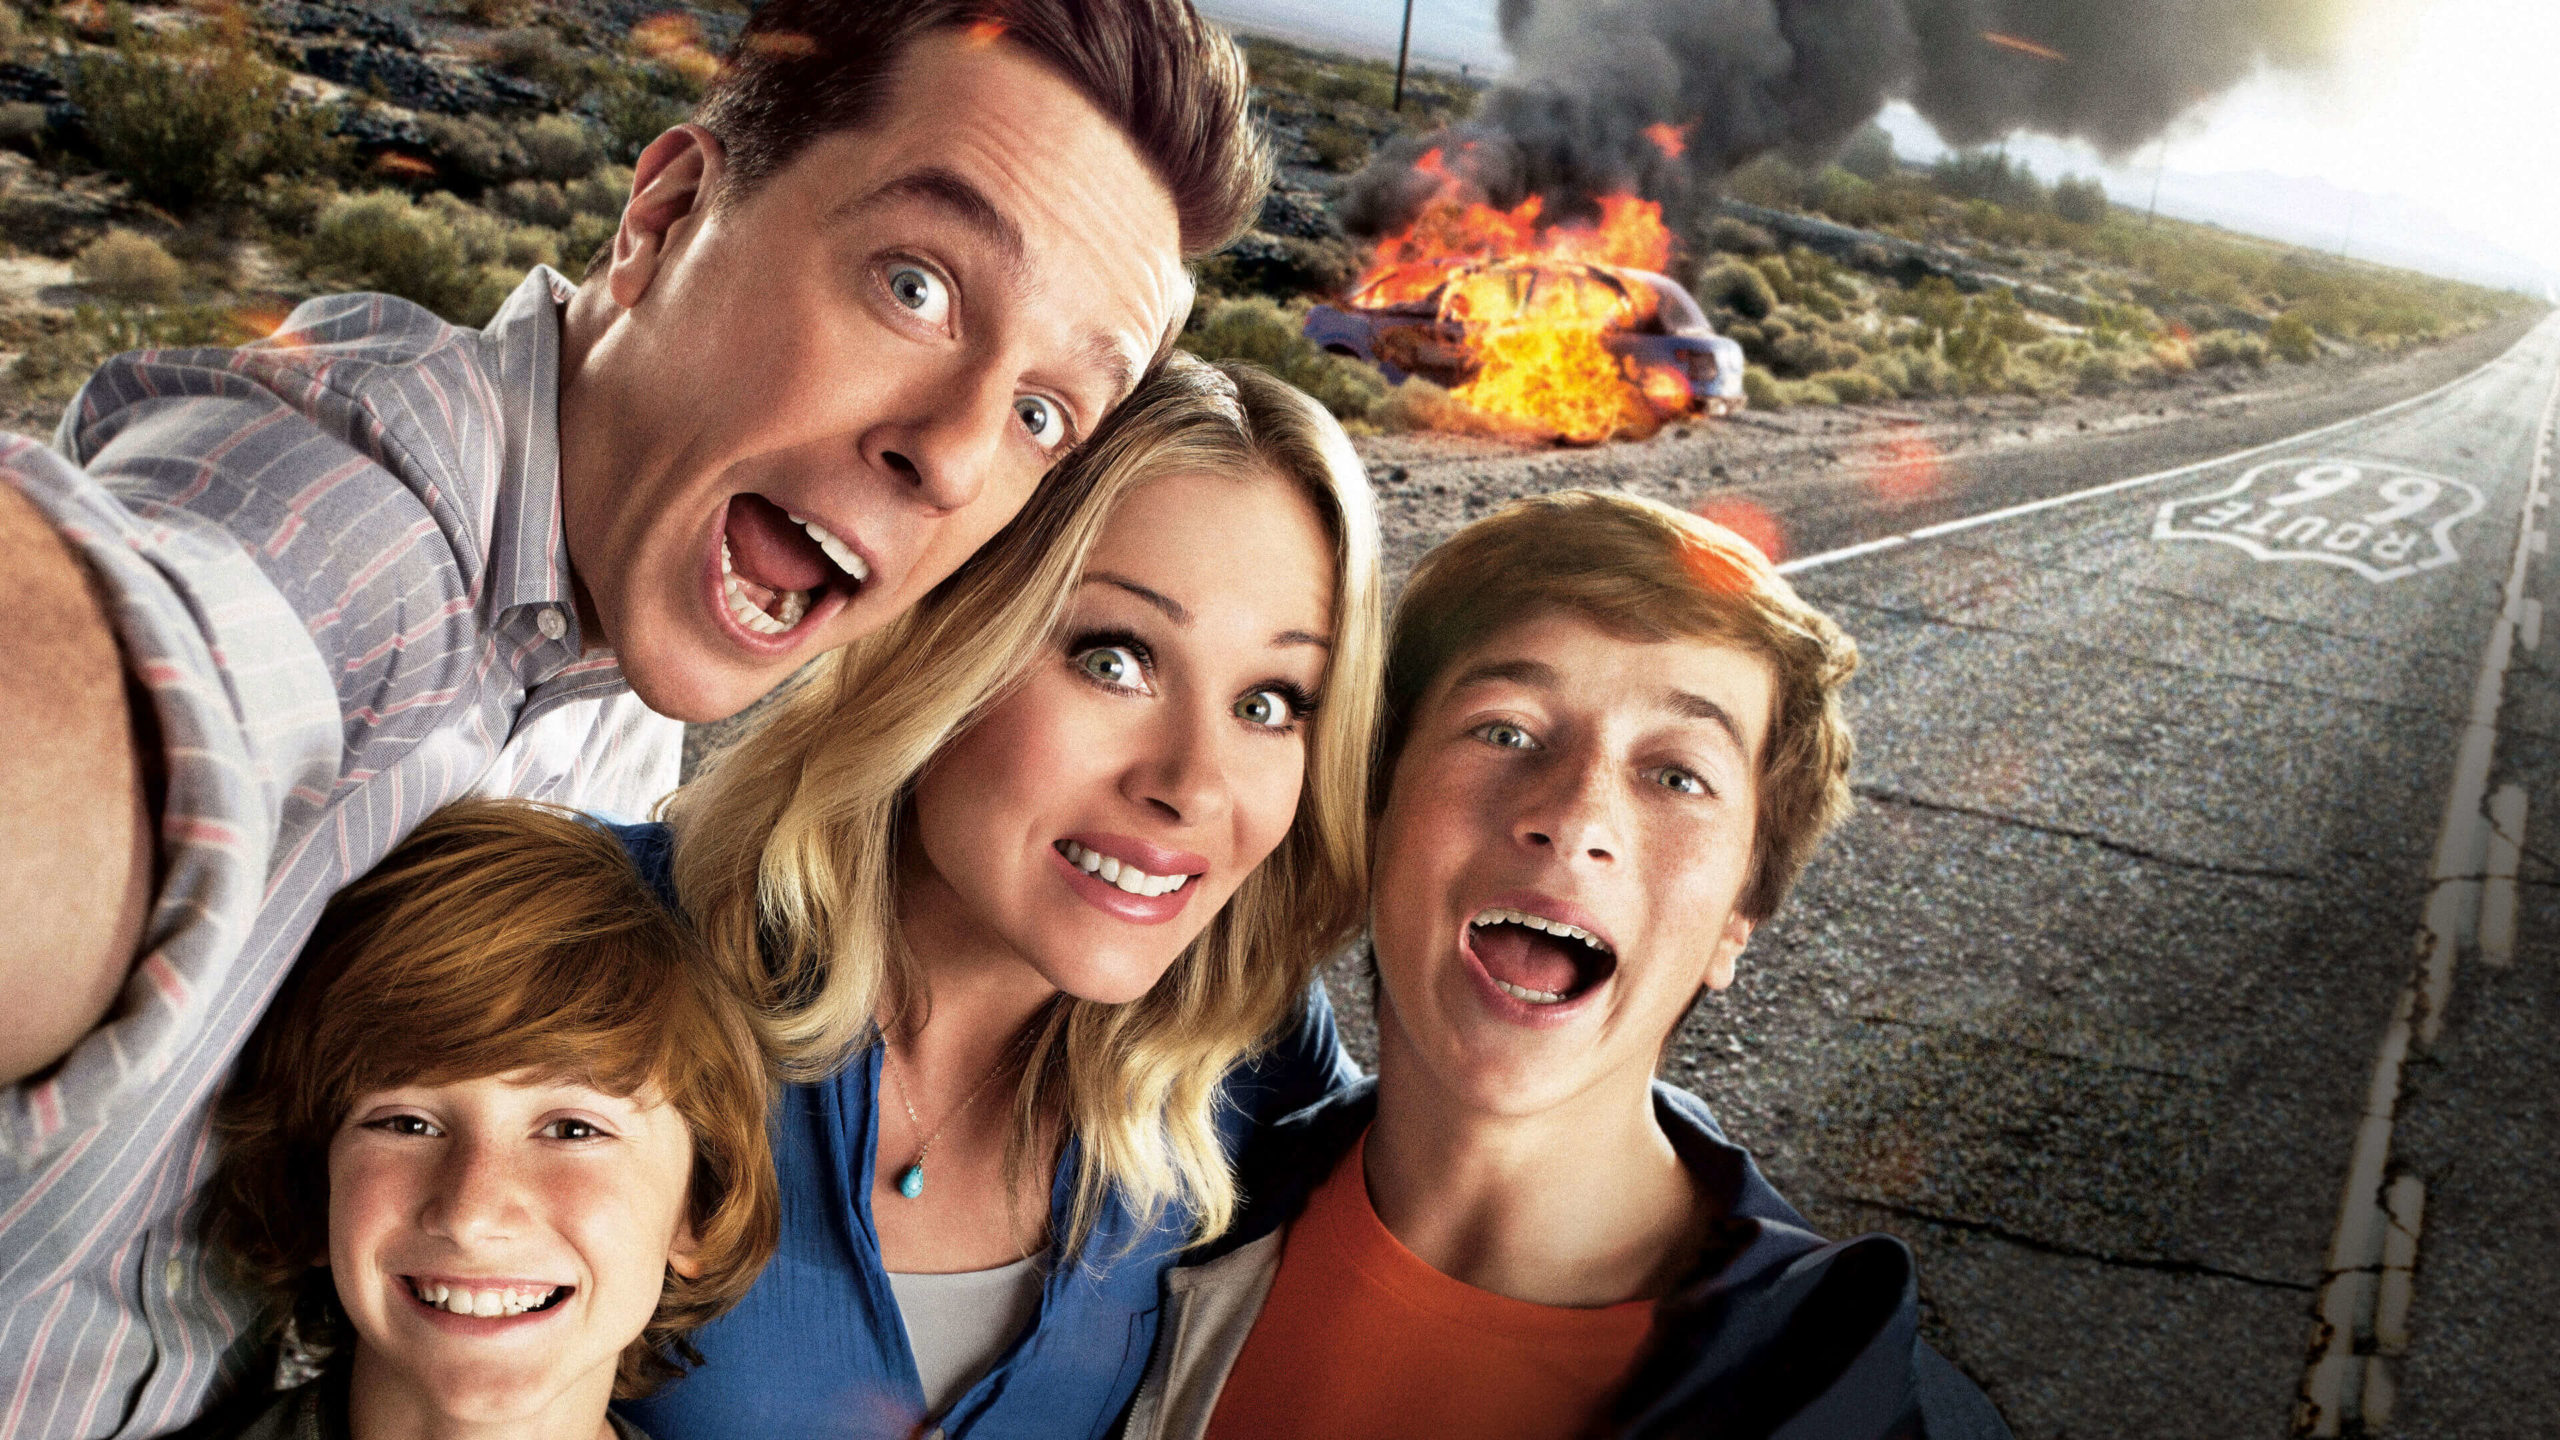 How to Watch Vacation (2015) on Netflix US in 2022